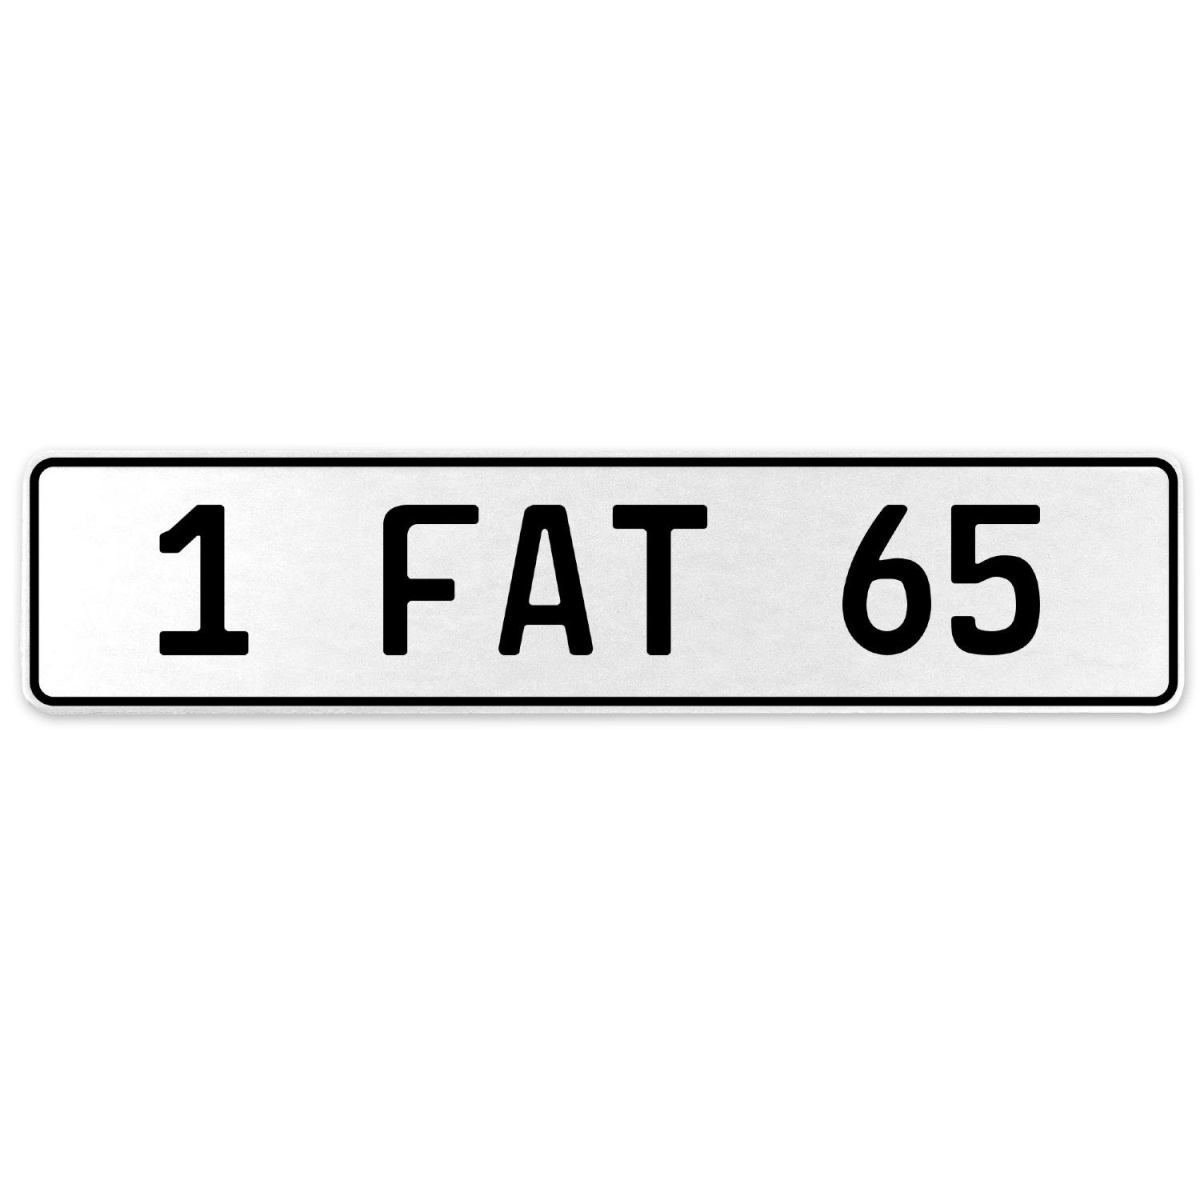 554662 1 Fat 65 - White Aluminum Street Sign Mancave Euro Plate Name Door Sign Wall